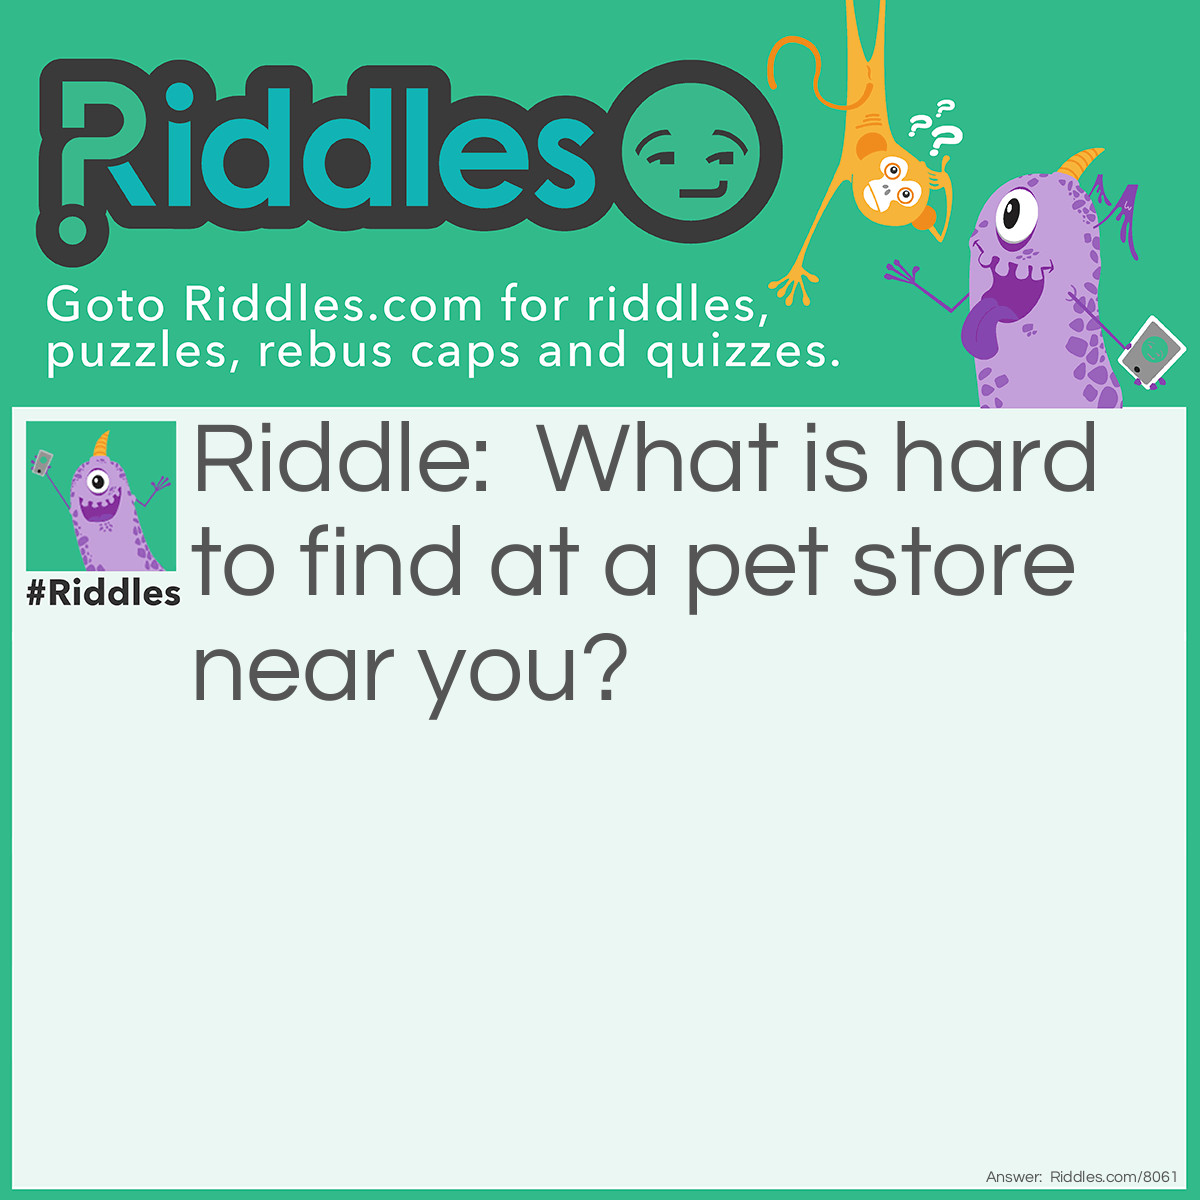 Riddle: What is hard to find at a pet store near you? Answer: A hard to find pet!